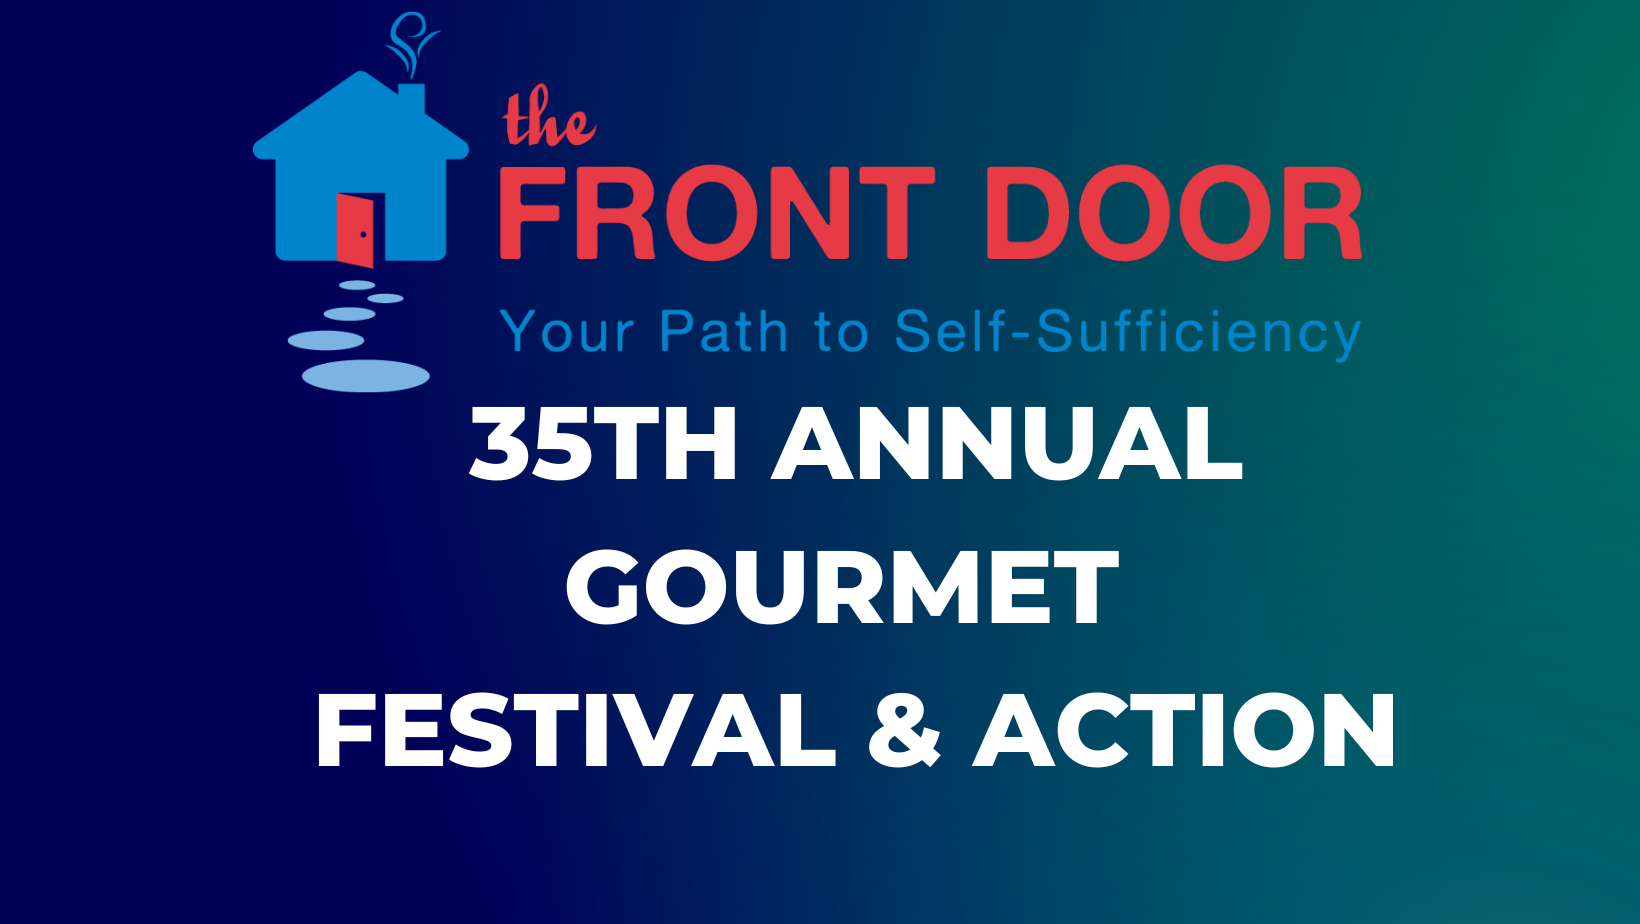 Enter To Win Two Tickets To The 35th Annual Gourmet Festival & Action